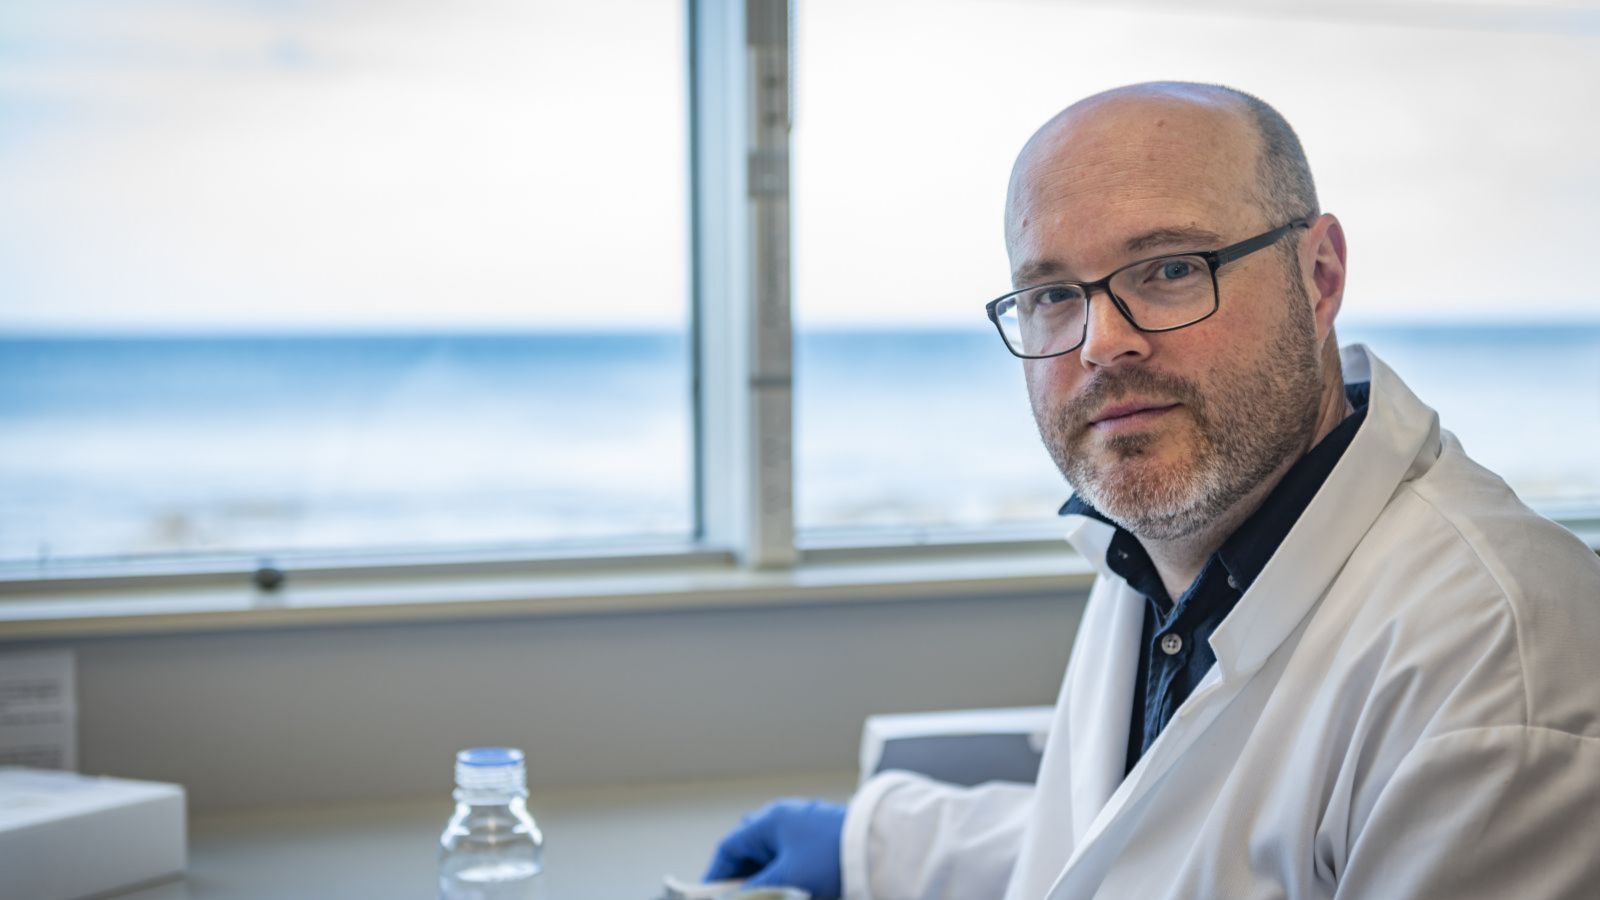 A man wearing glasses and a lab coat looks into the camera, with a background of the ocean.